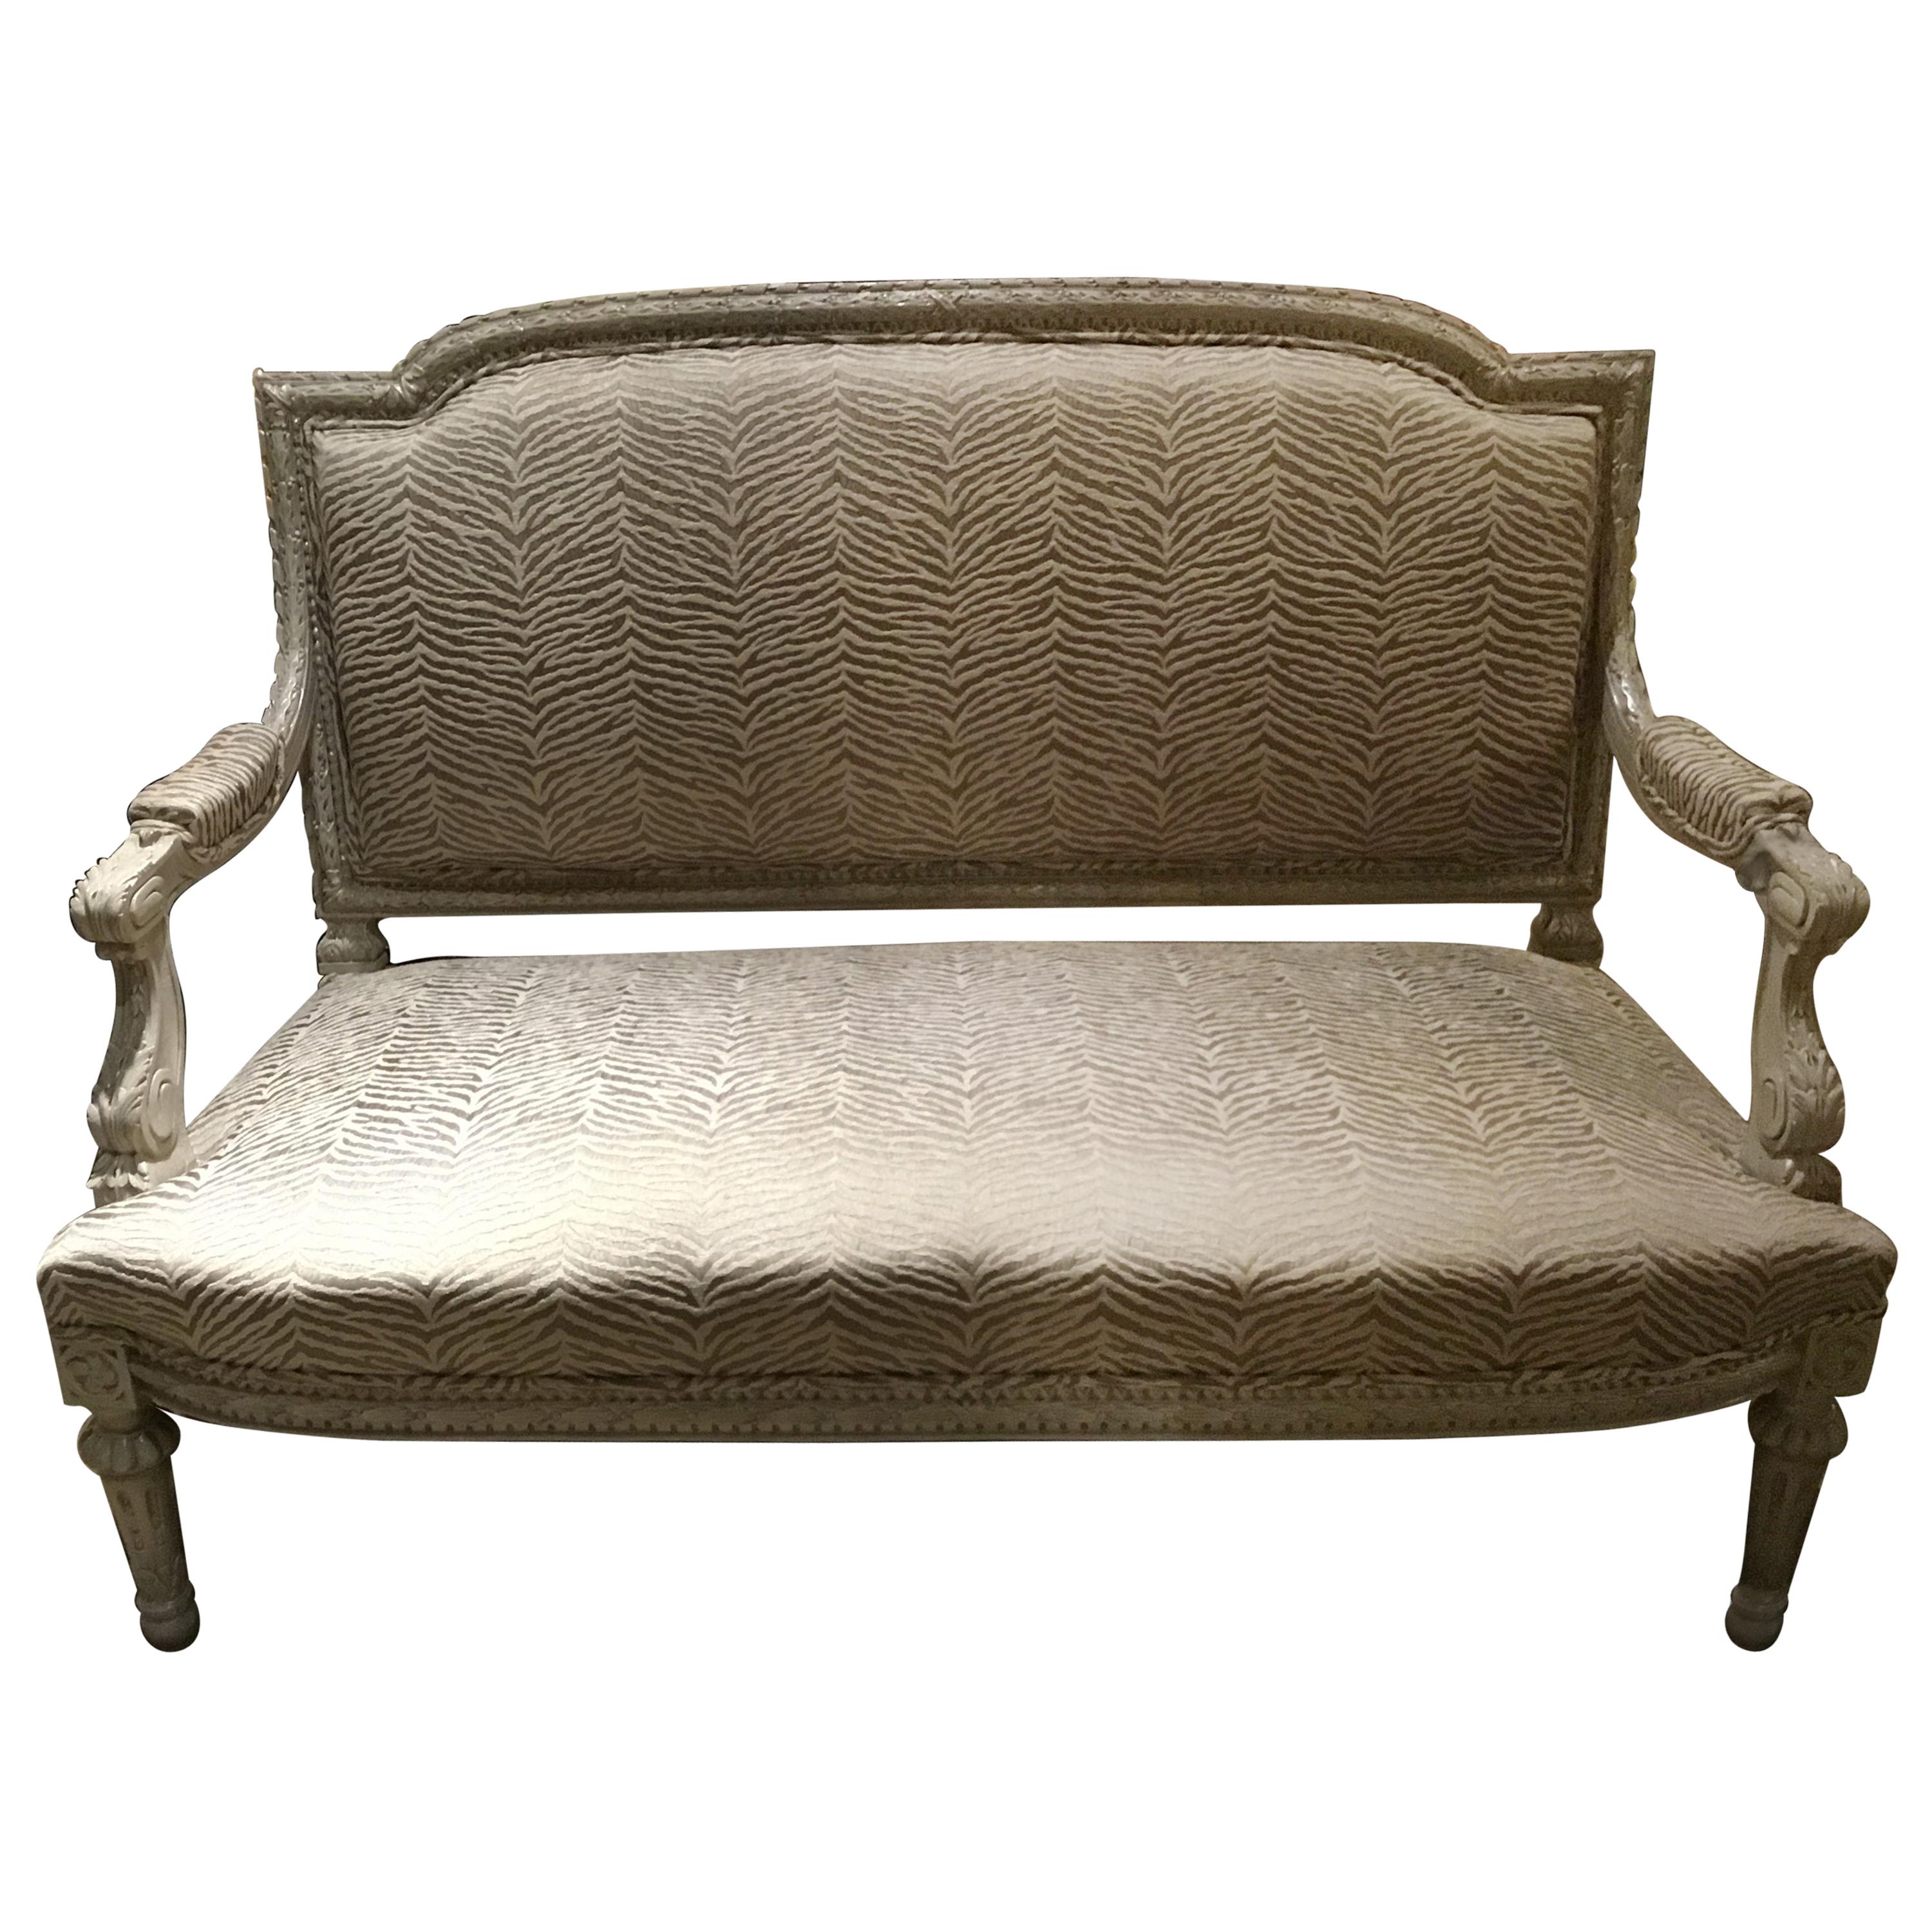 Louis XVI Style Settee/Love Seat, Polychromed with New Upholstery, 19th Century